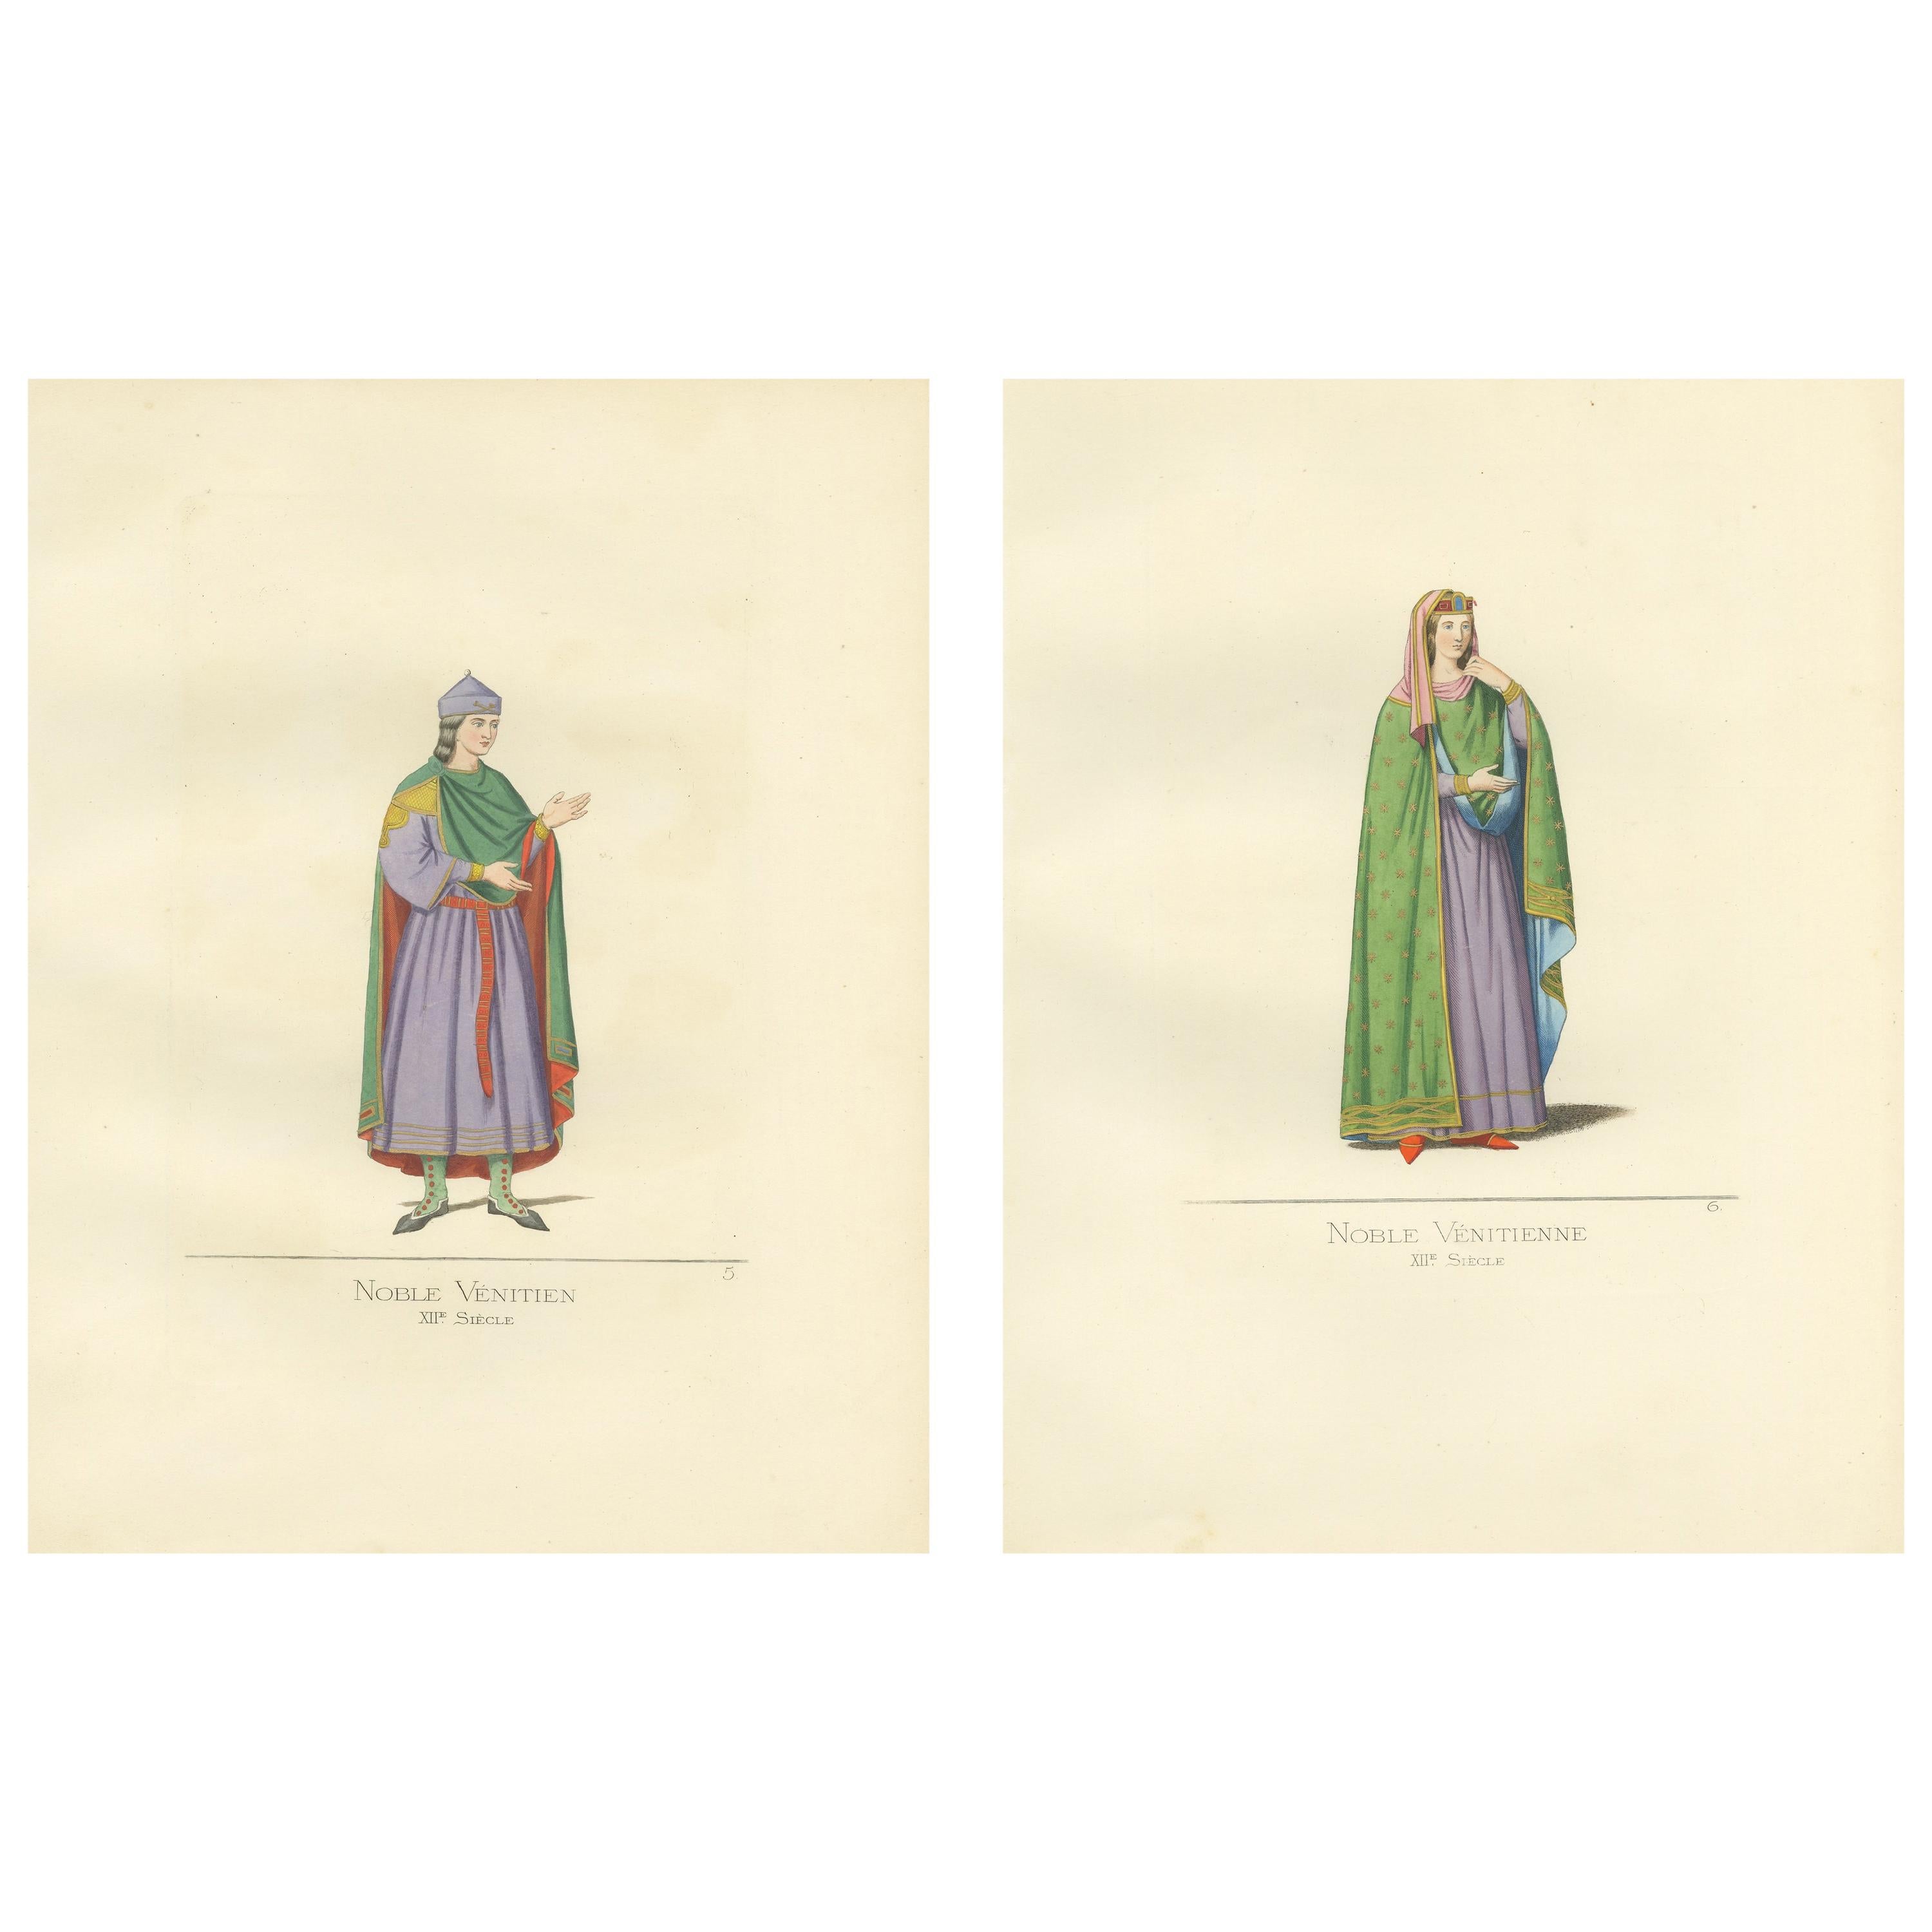 Set of 2 Antique Prints of a Nobleman and Noblewoman of Venice by Bonnard, 1860 For Sale